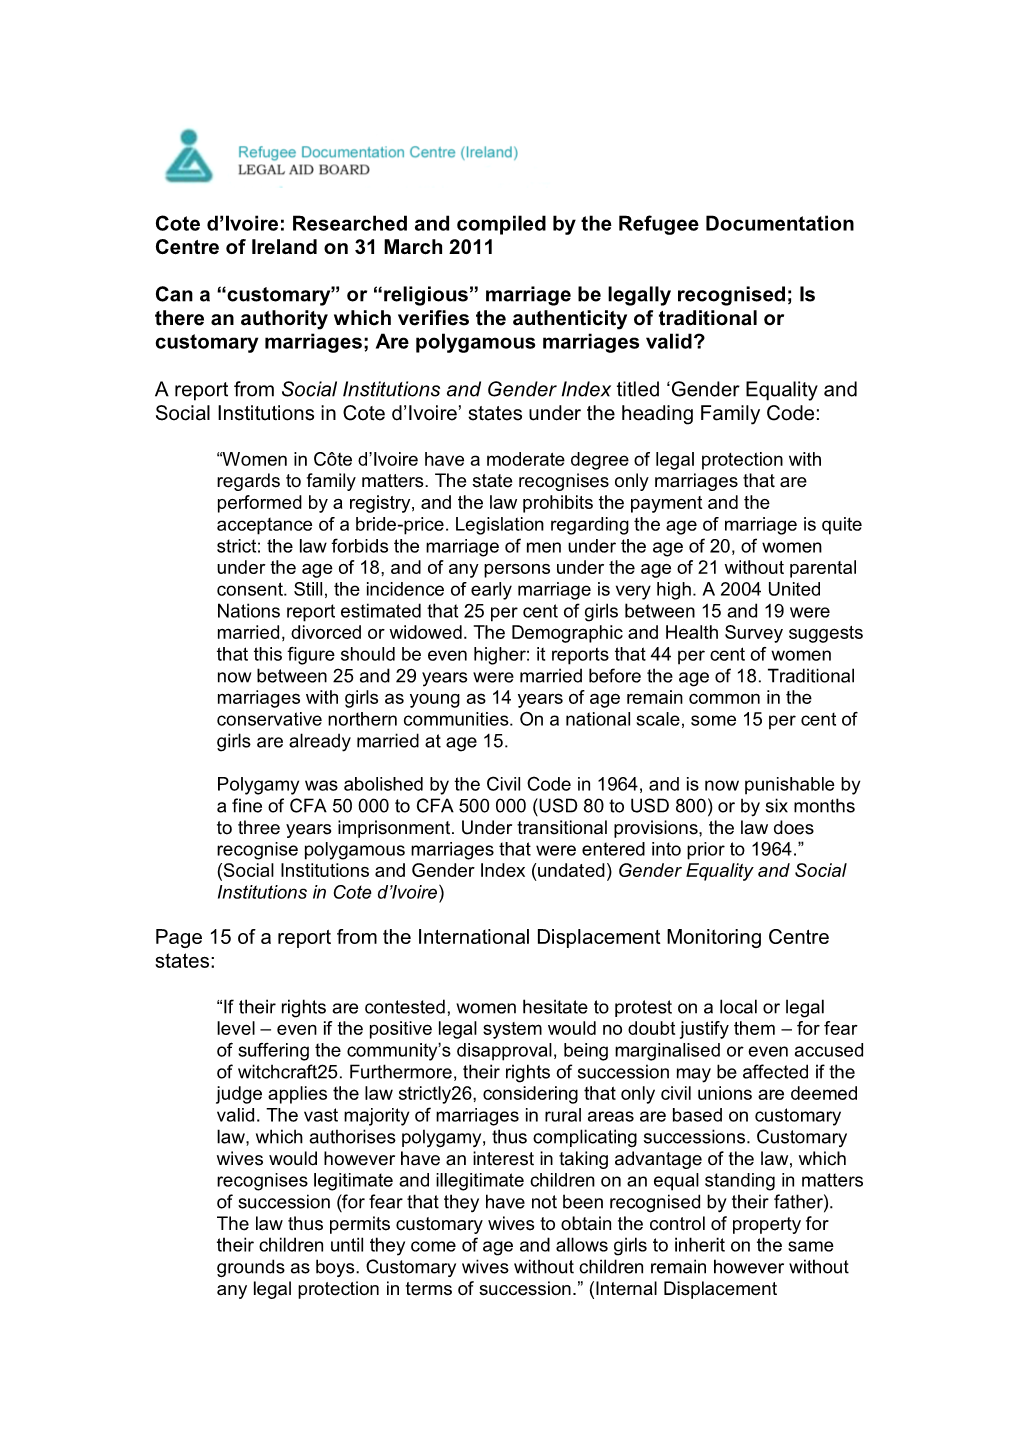 Cote D'ivoire: Researched and Compiled by the Refugee